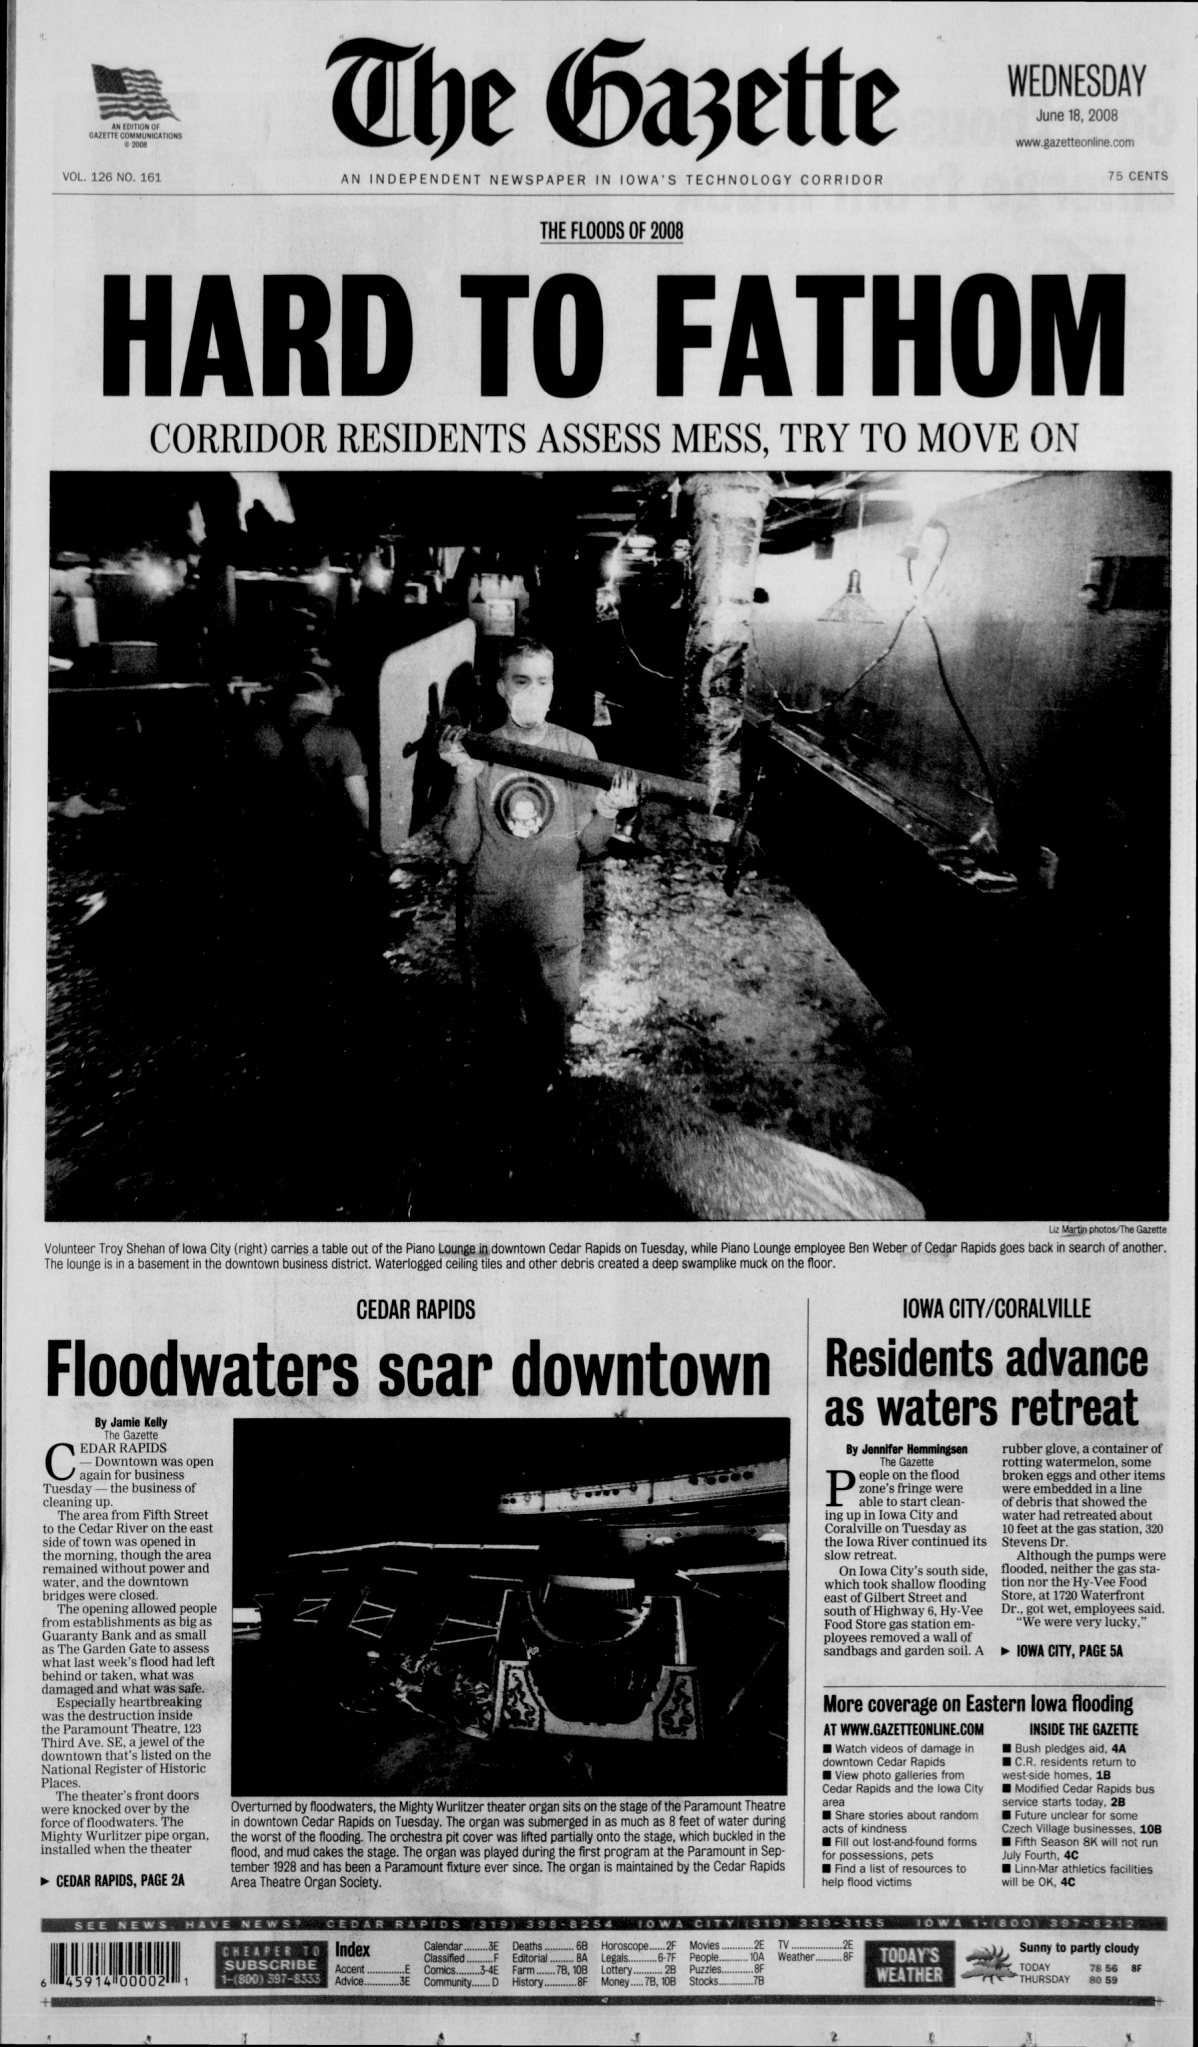 Gazette front page dated June 18, 2000 with headline HARD TO FATHOM and a photo of people walking through floodwater. Below it is a dark photo of the Mighty Wurlitzer knocked over and the headline Floodwaters Scar Downtown.